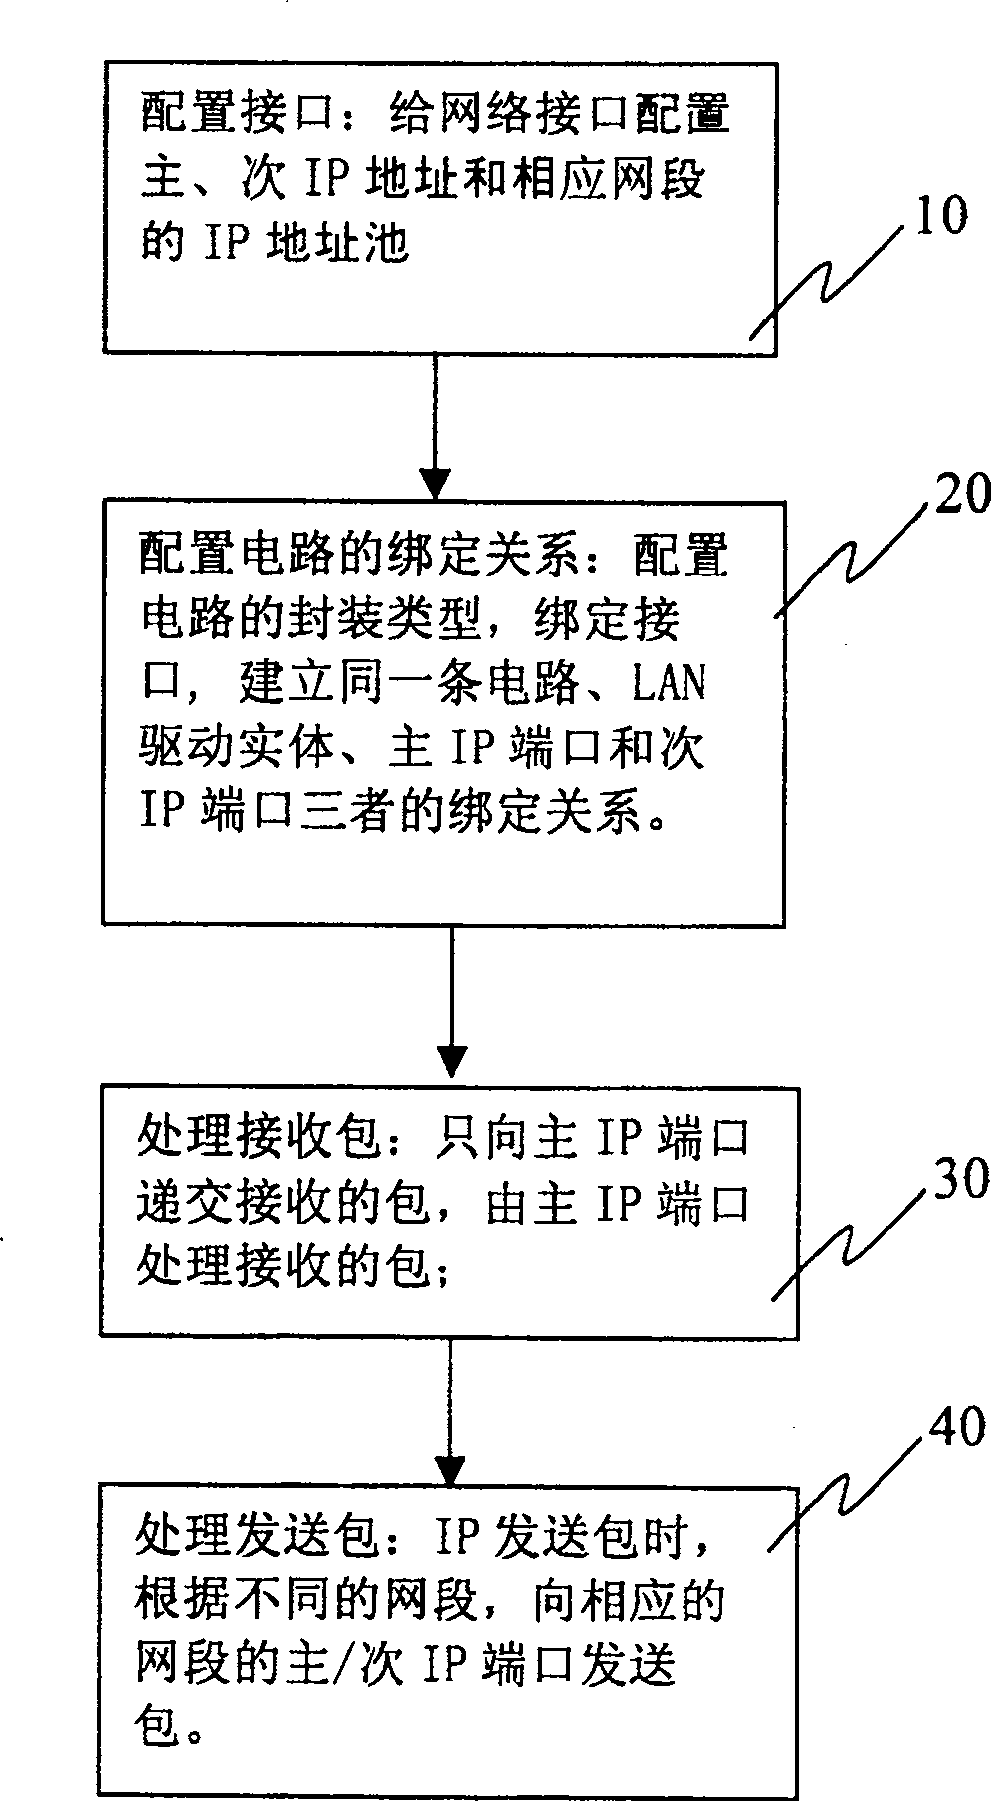 Method and device for providing multiple different net section IP address by one circuit